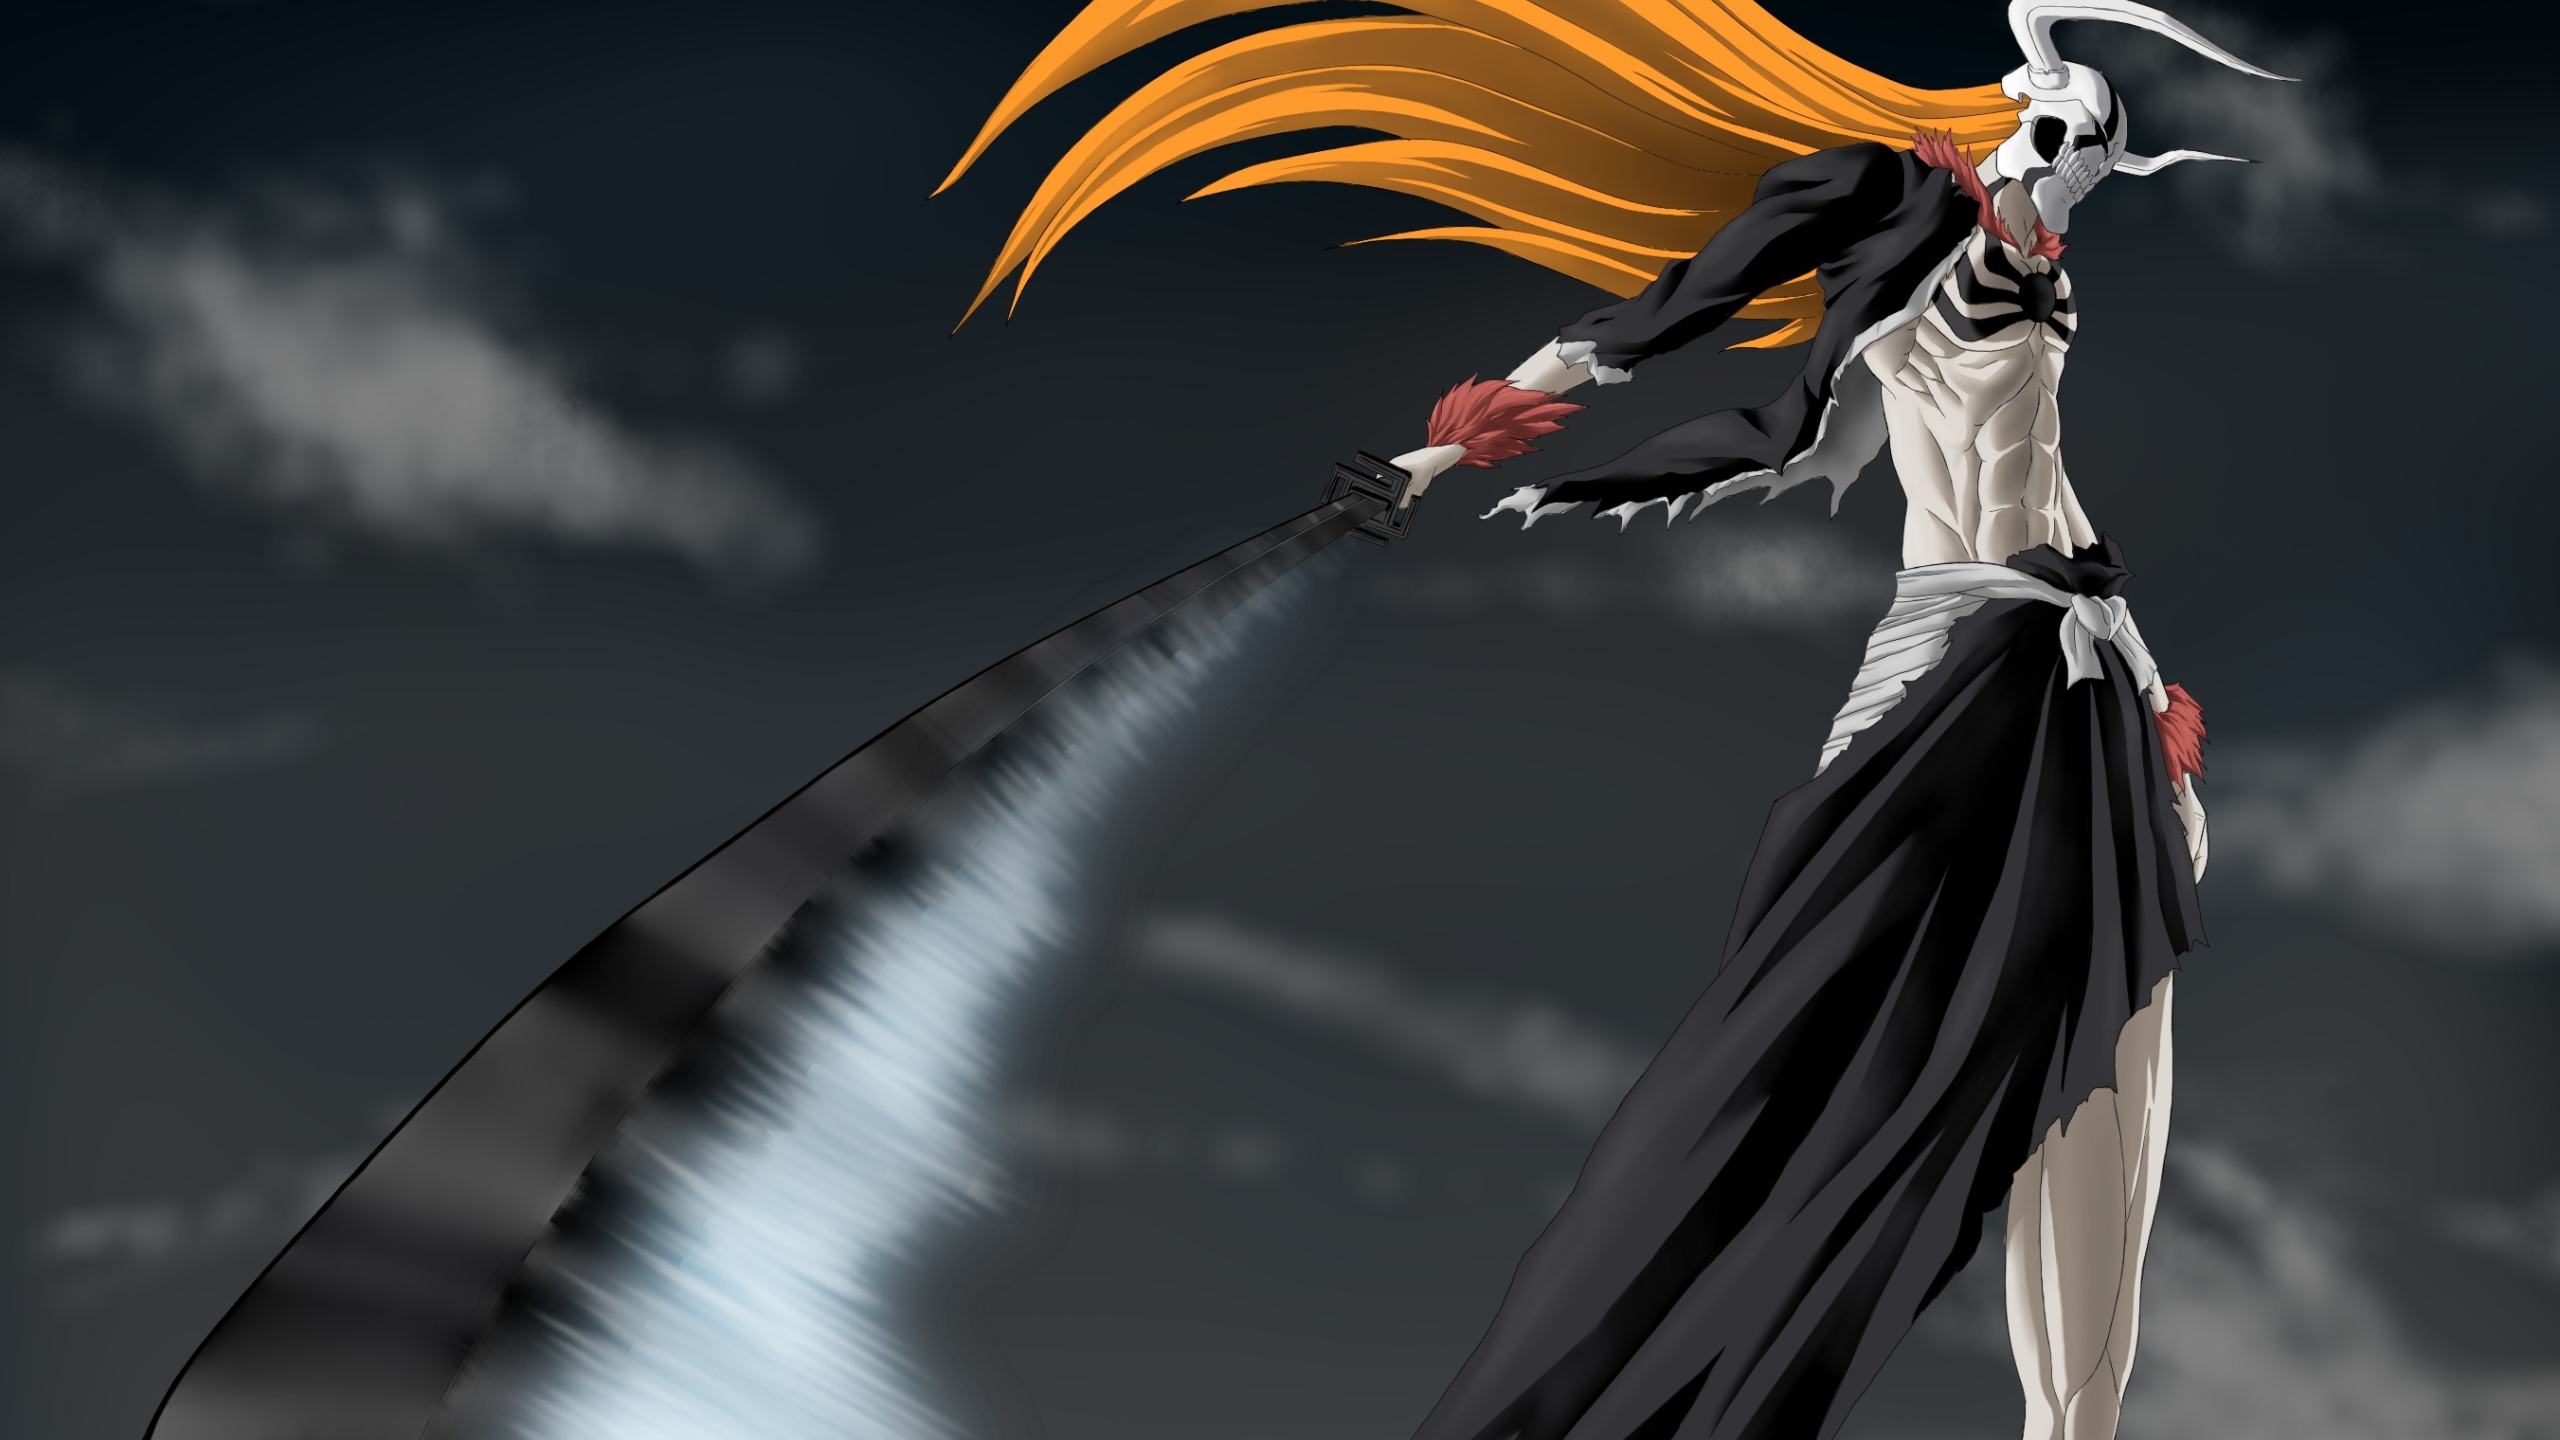 2560x1440 Bleach Ichigo Sword 1440p Resolution Wallpaper Hd Anime 4k Wallpapers Images Photos And Background